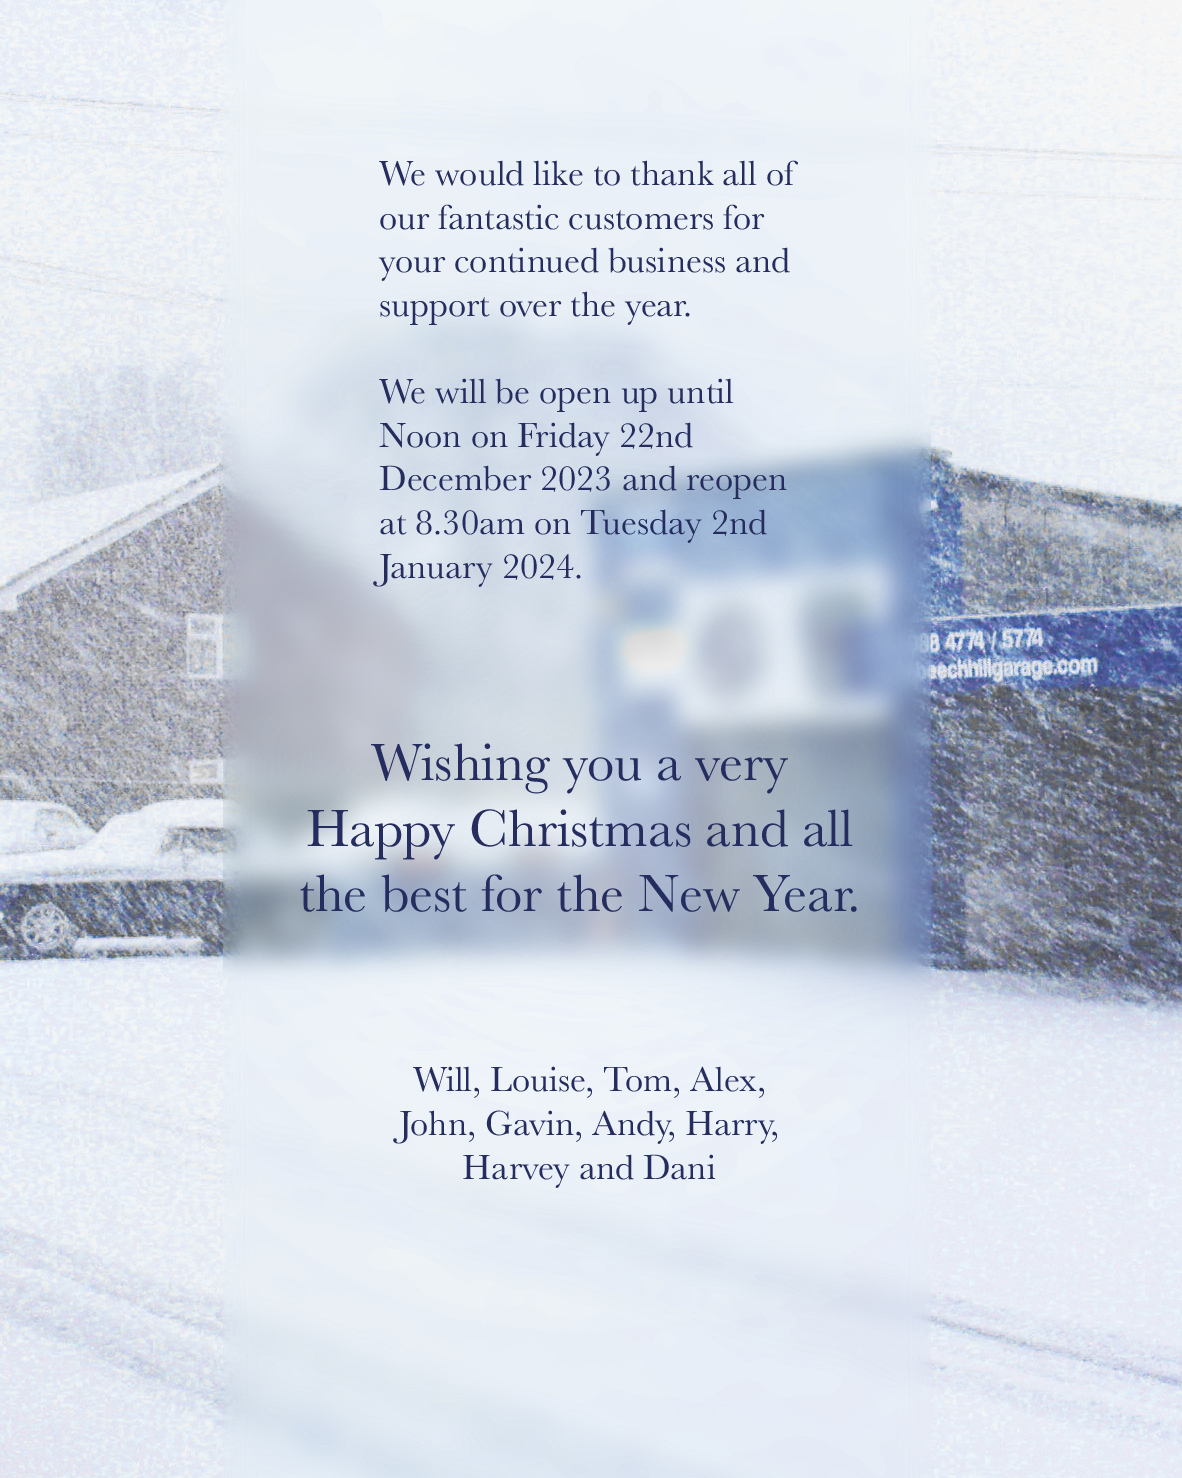 Happy Christmas from Beech Hill Garage